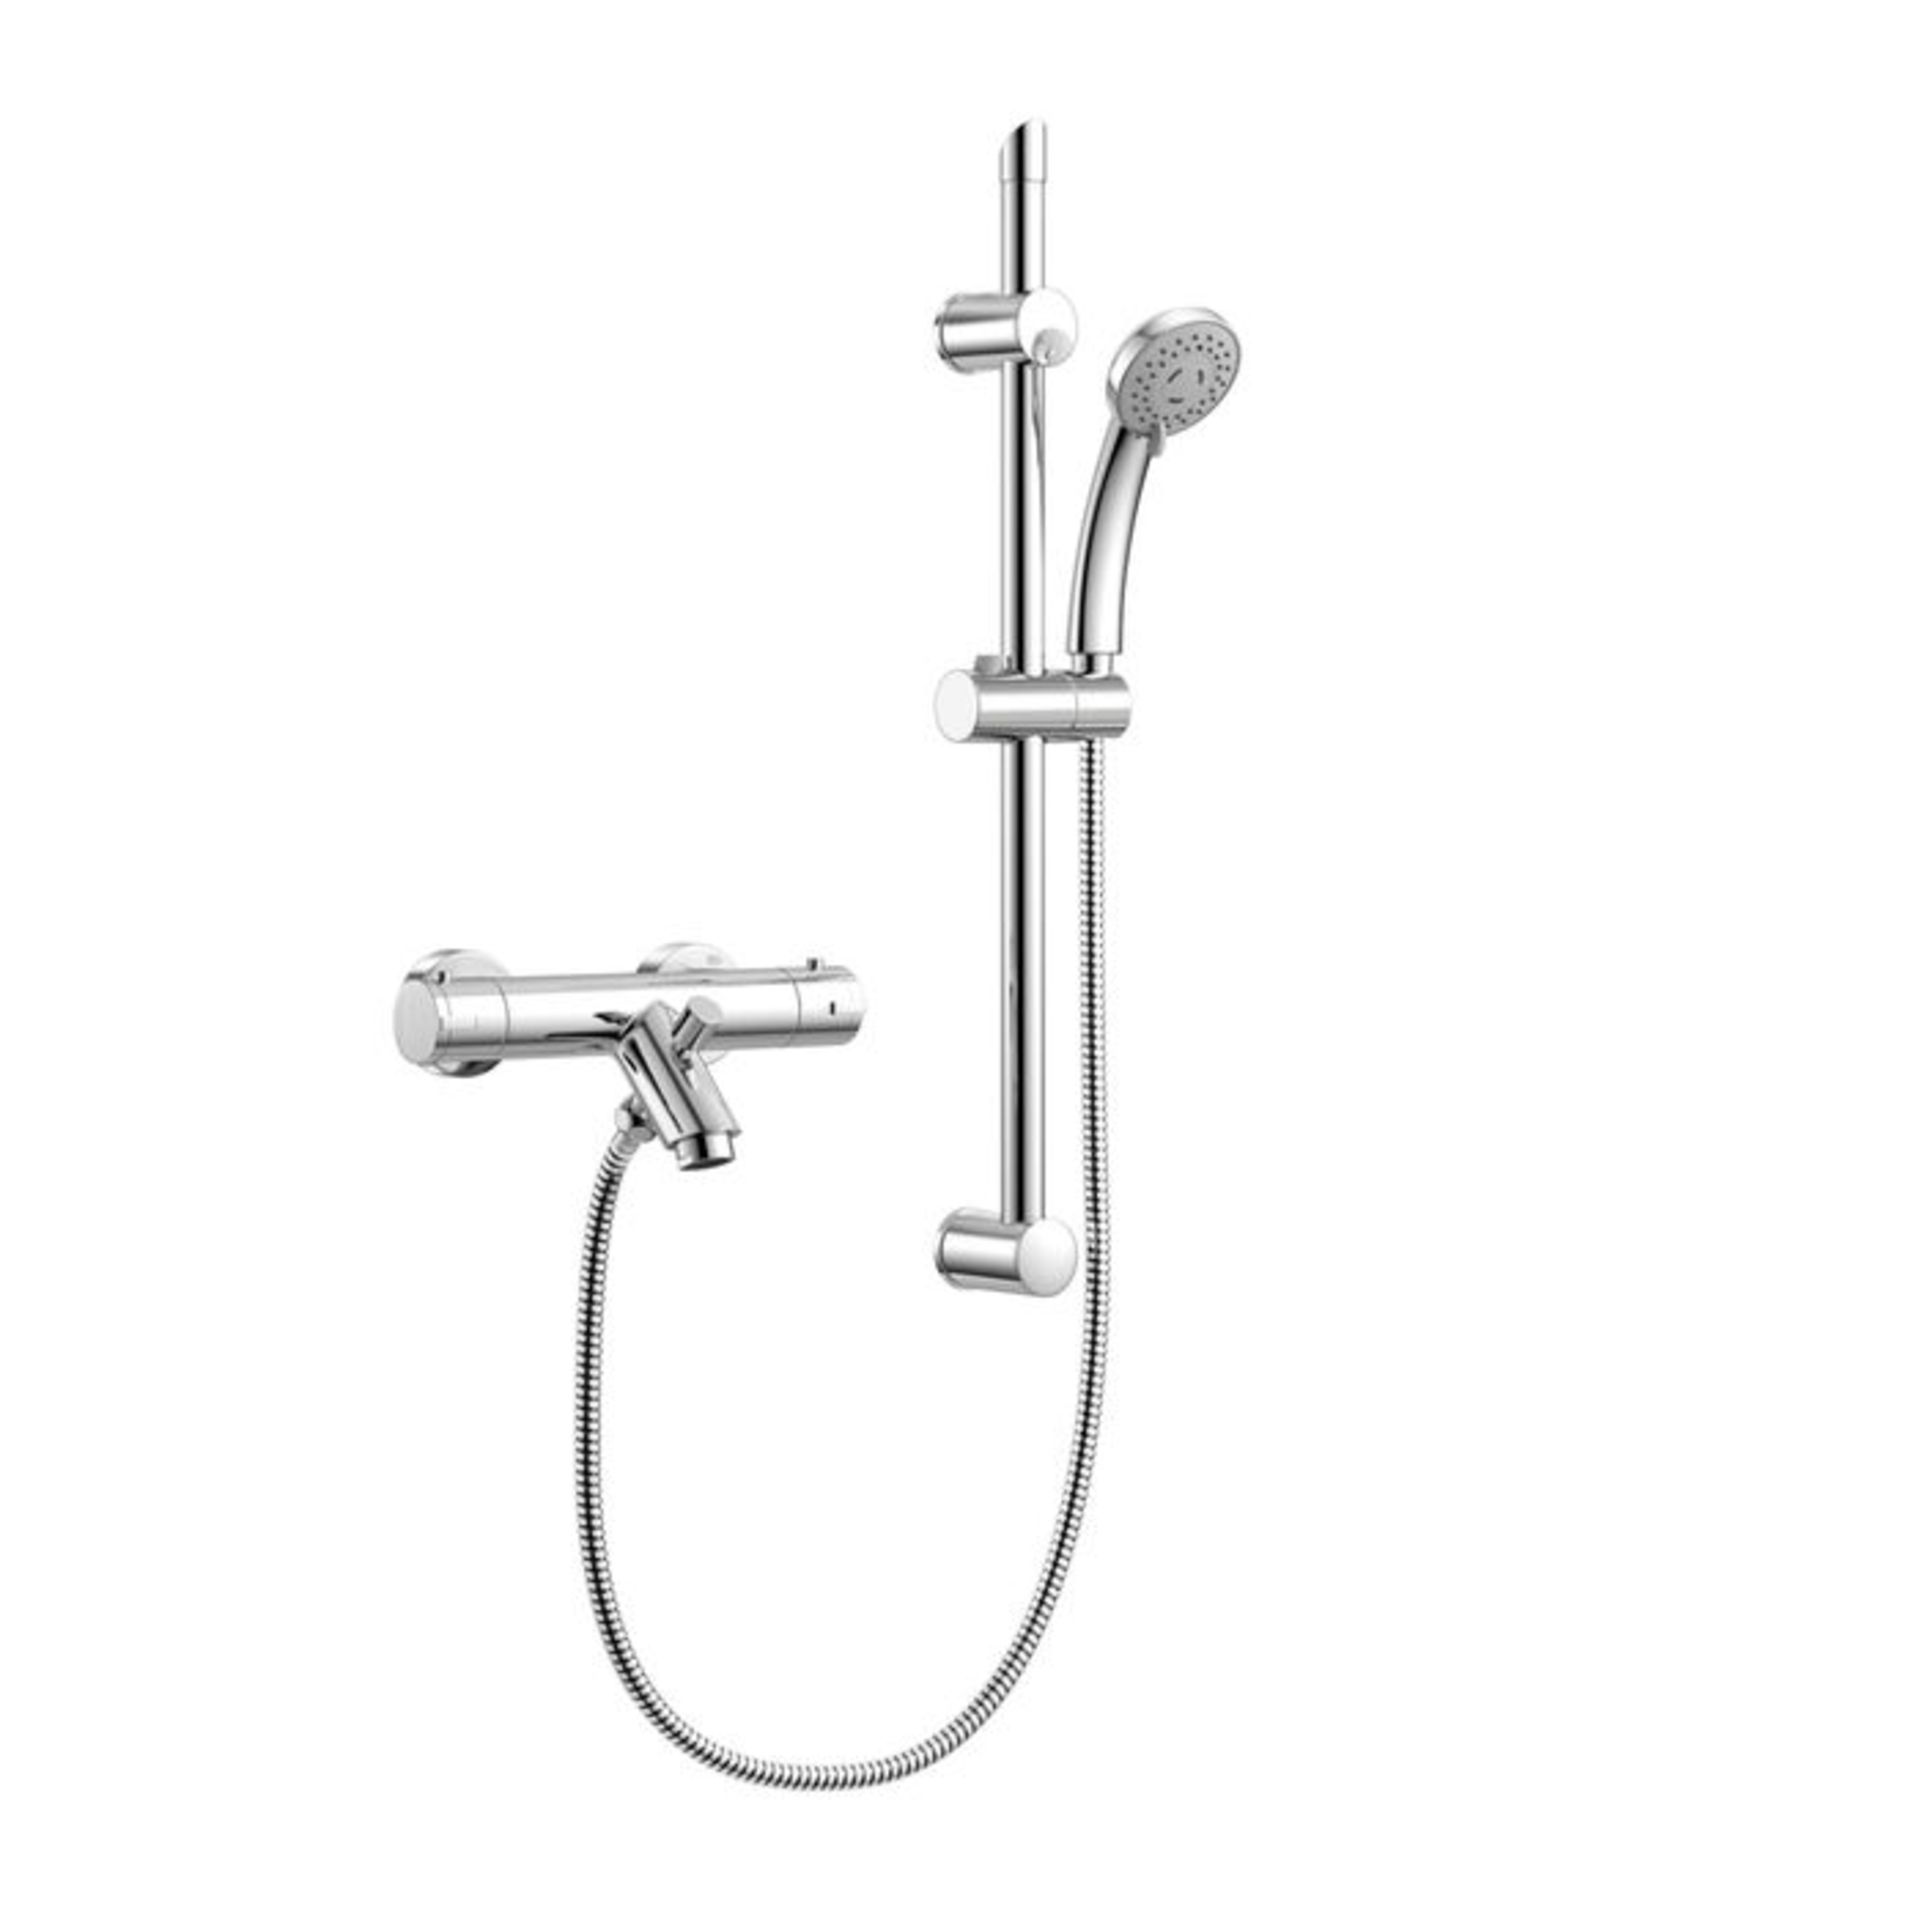 (TT164) Thermostatic Surface-mounted Bath tap + 3 Positions Shower set Chrome. RRP £382.99. ... - Image 2 of 3